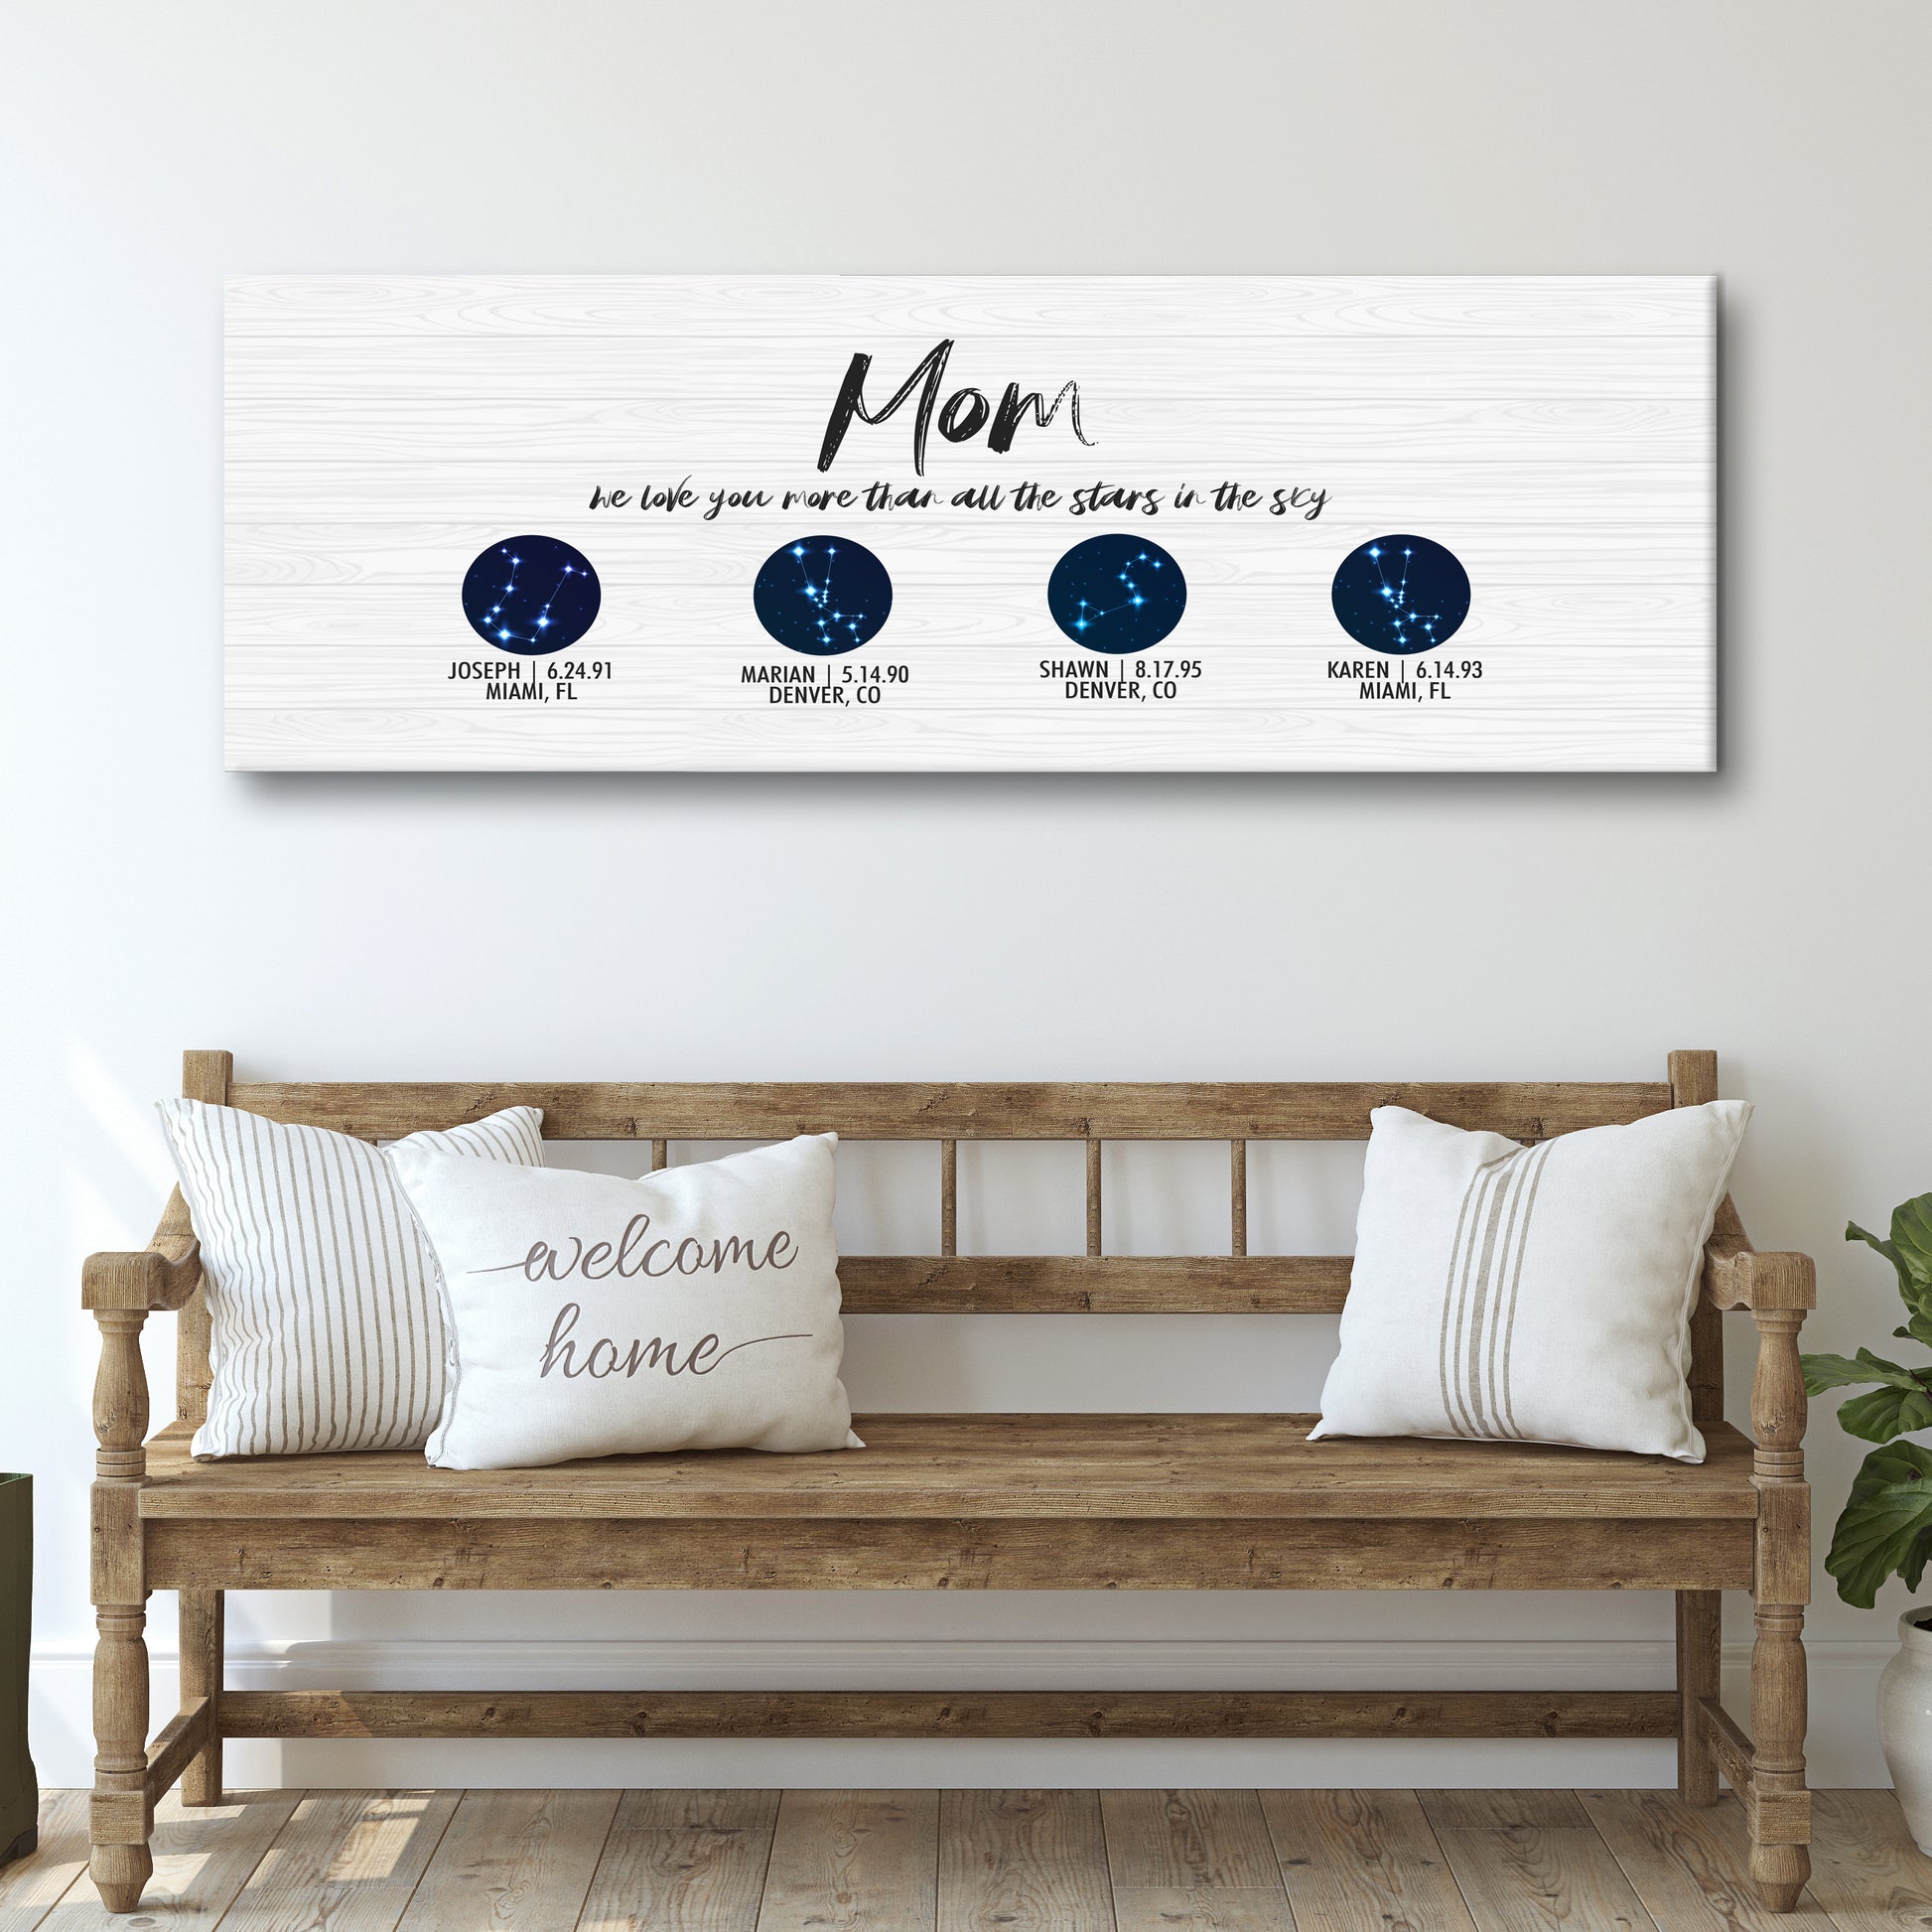 MOM, We love you more than the stars Sign  Style 2 - Image by Tailored Canvases